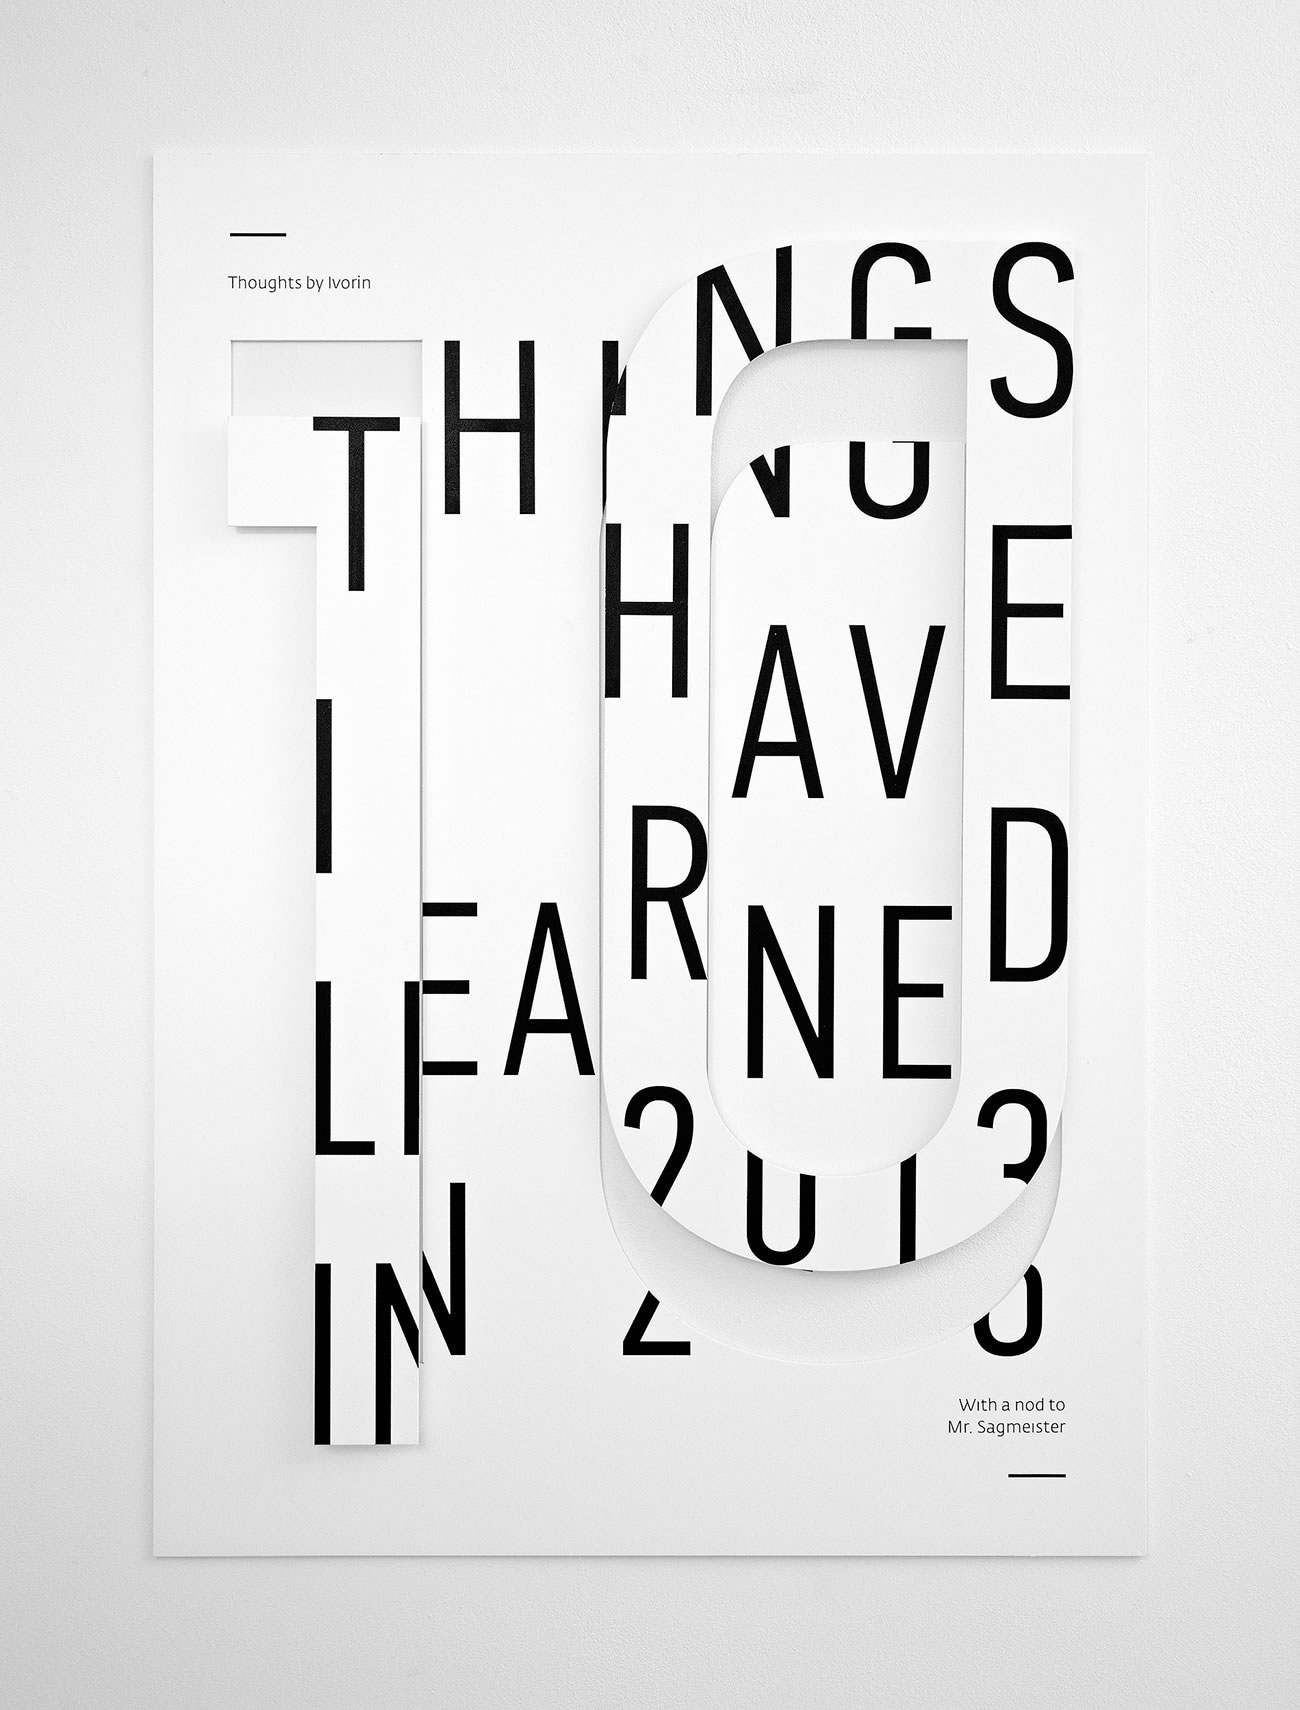 Excellent-Posters-From-The-Design-World-7 Cool Poster Designs: Examples and Ideas To Try